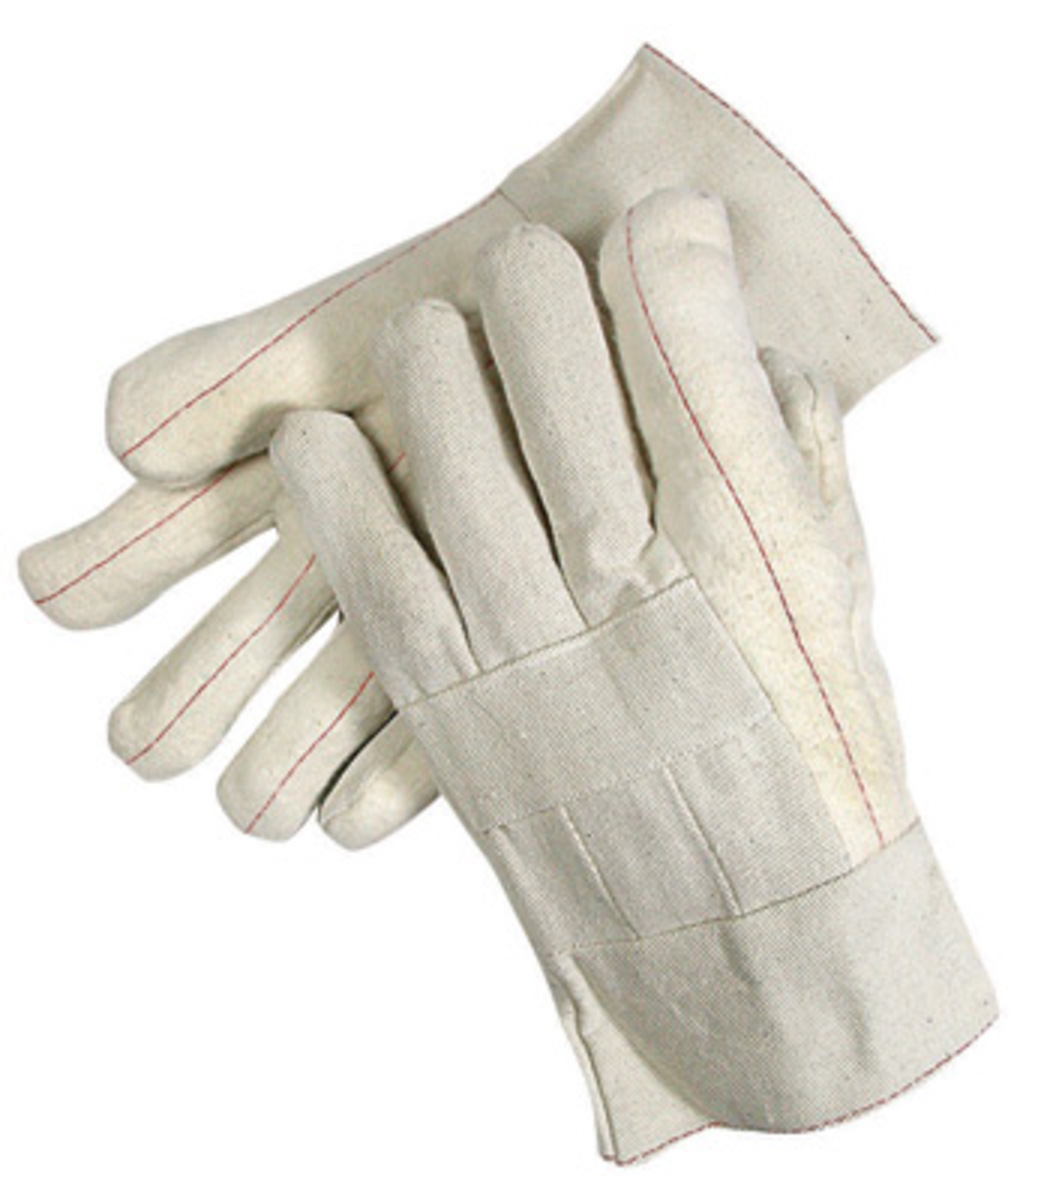 RADNOR® Natural Standard Weight Cotton Hot Mill Gloves With Band Top Cuff